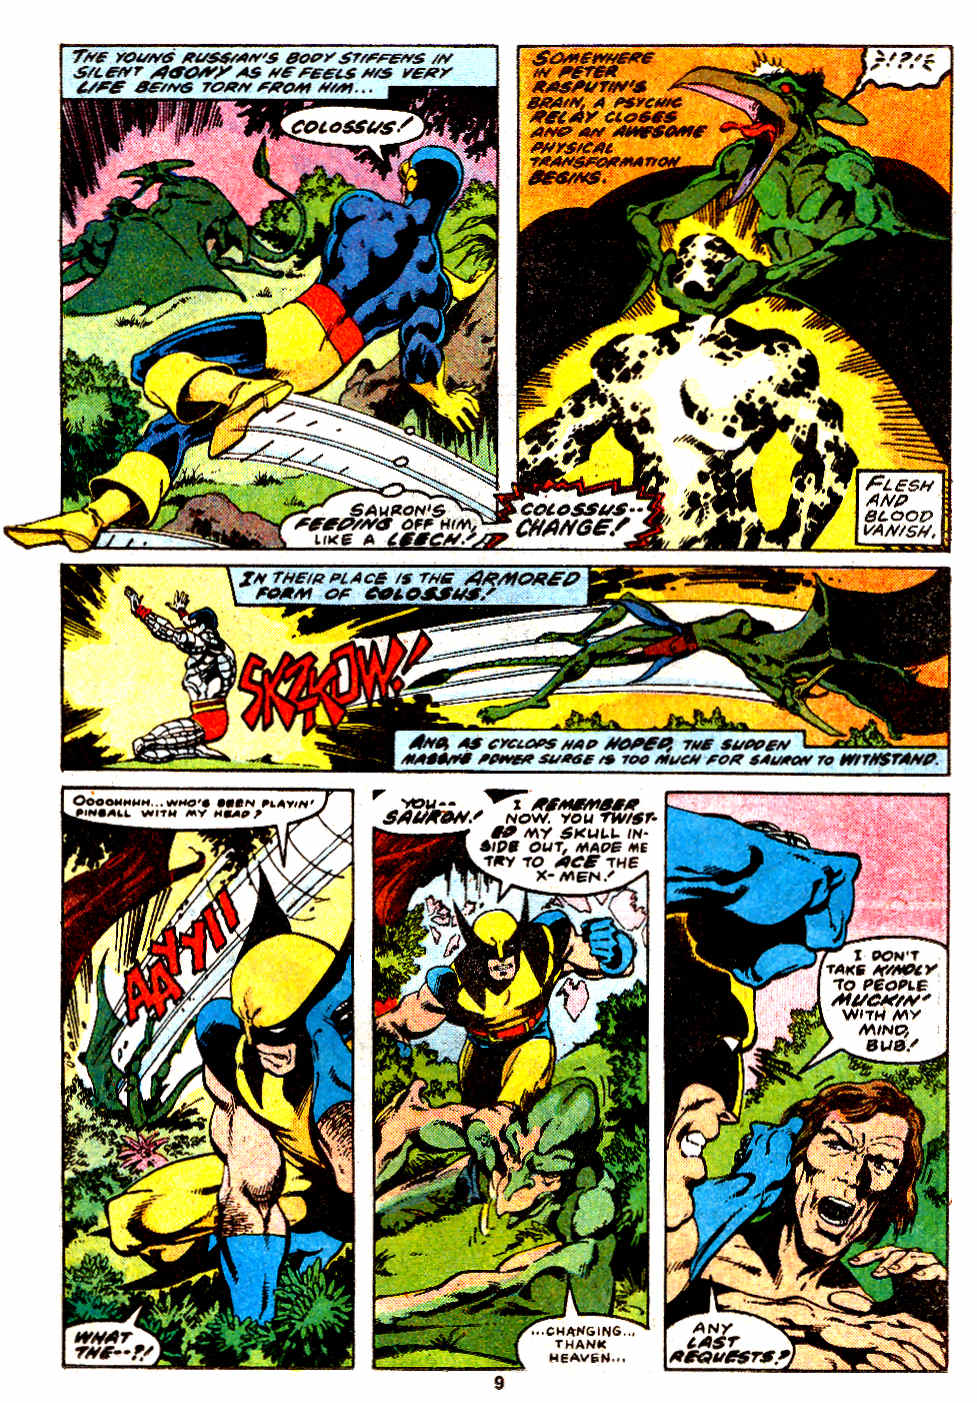 Surge X Men Porn - Classic X Men Issue 21 | Read Classic X Men Issue 21 comic online in high  quality. Read Full Comic online for free - Read comics online in high  quality .